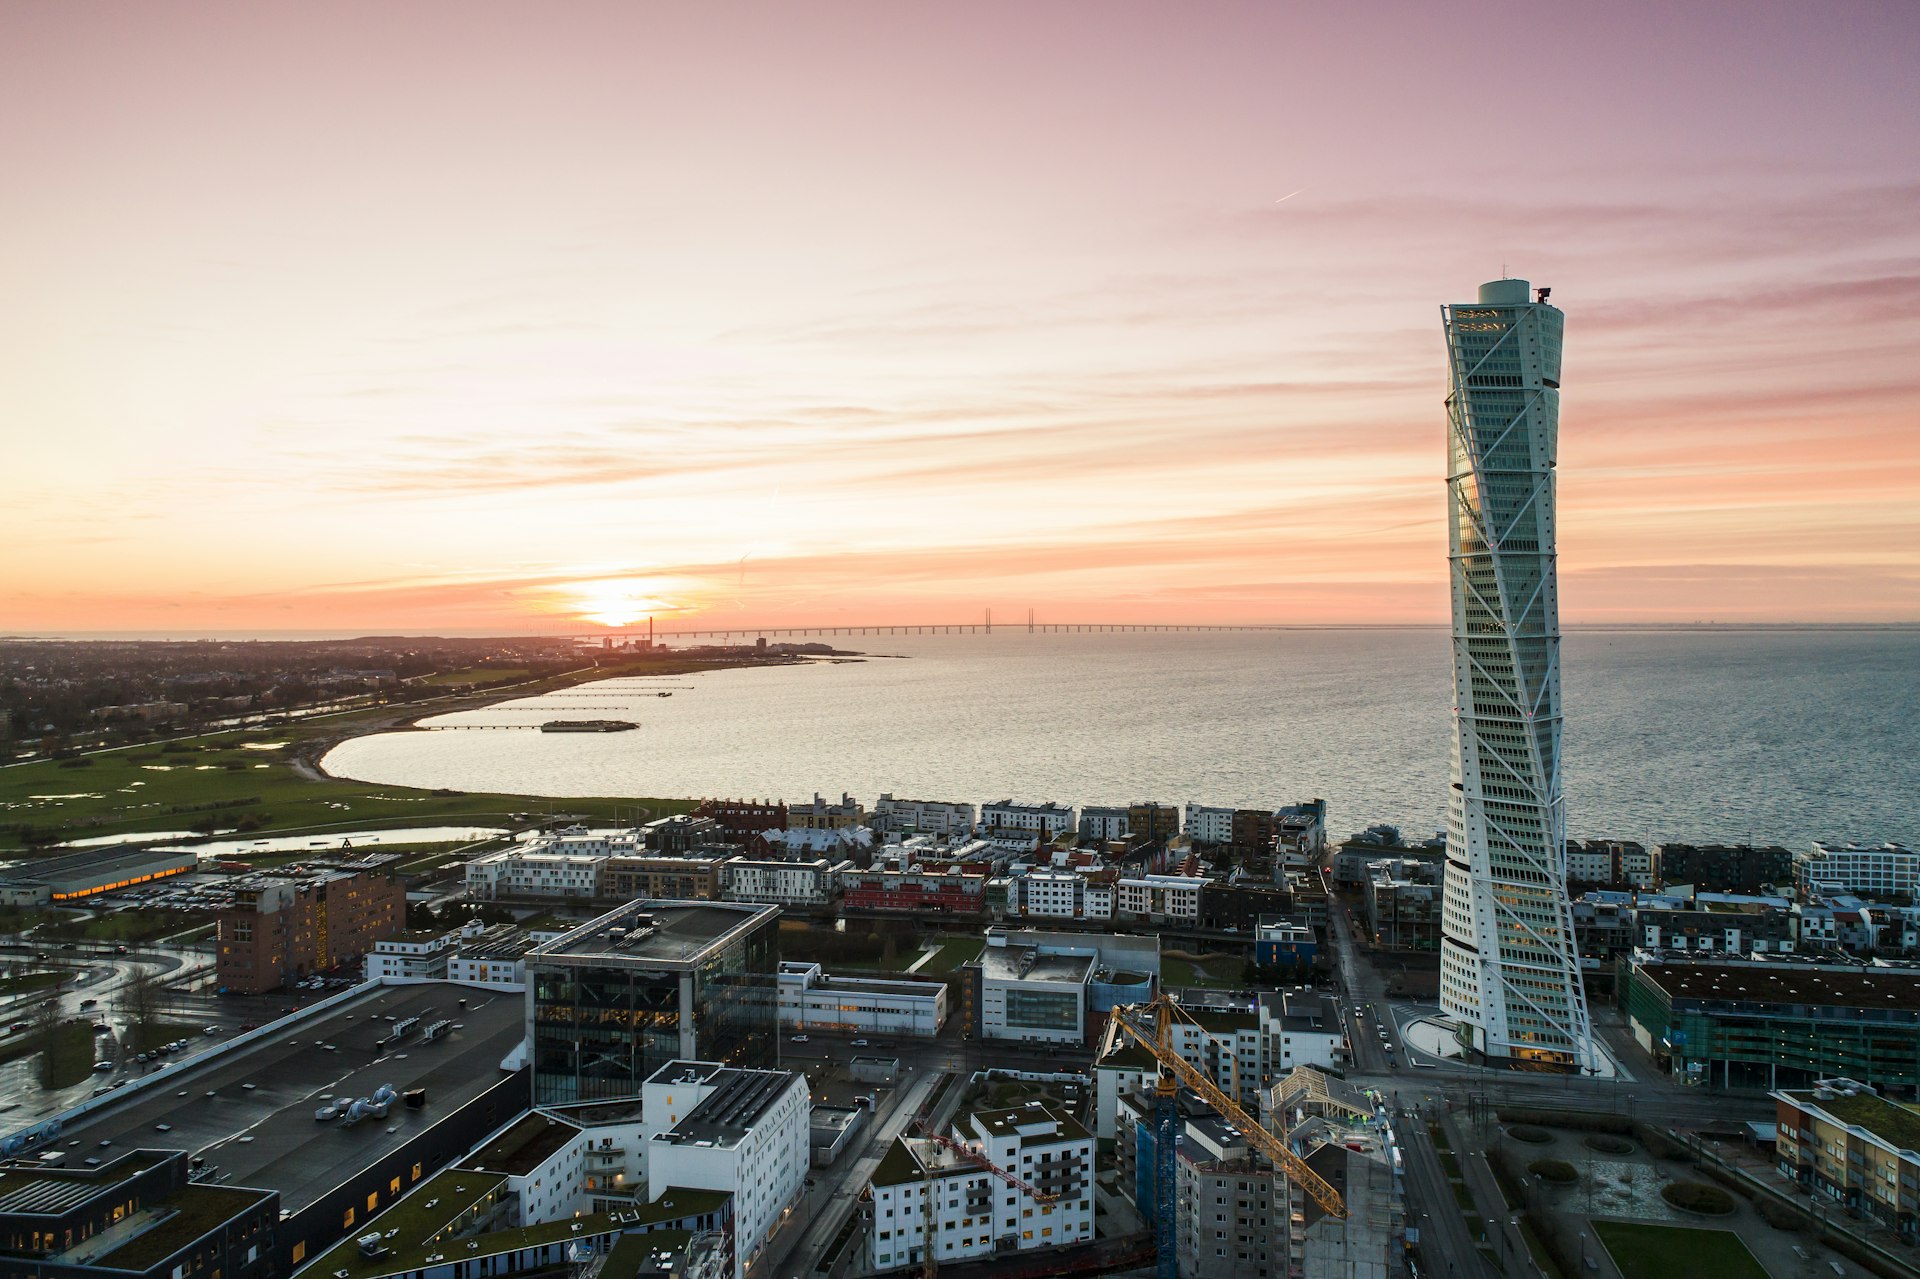 Aerial view of a residential area near the sea, with Turning Torso tower, Malmö, Sweden